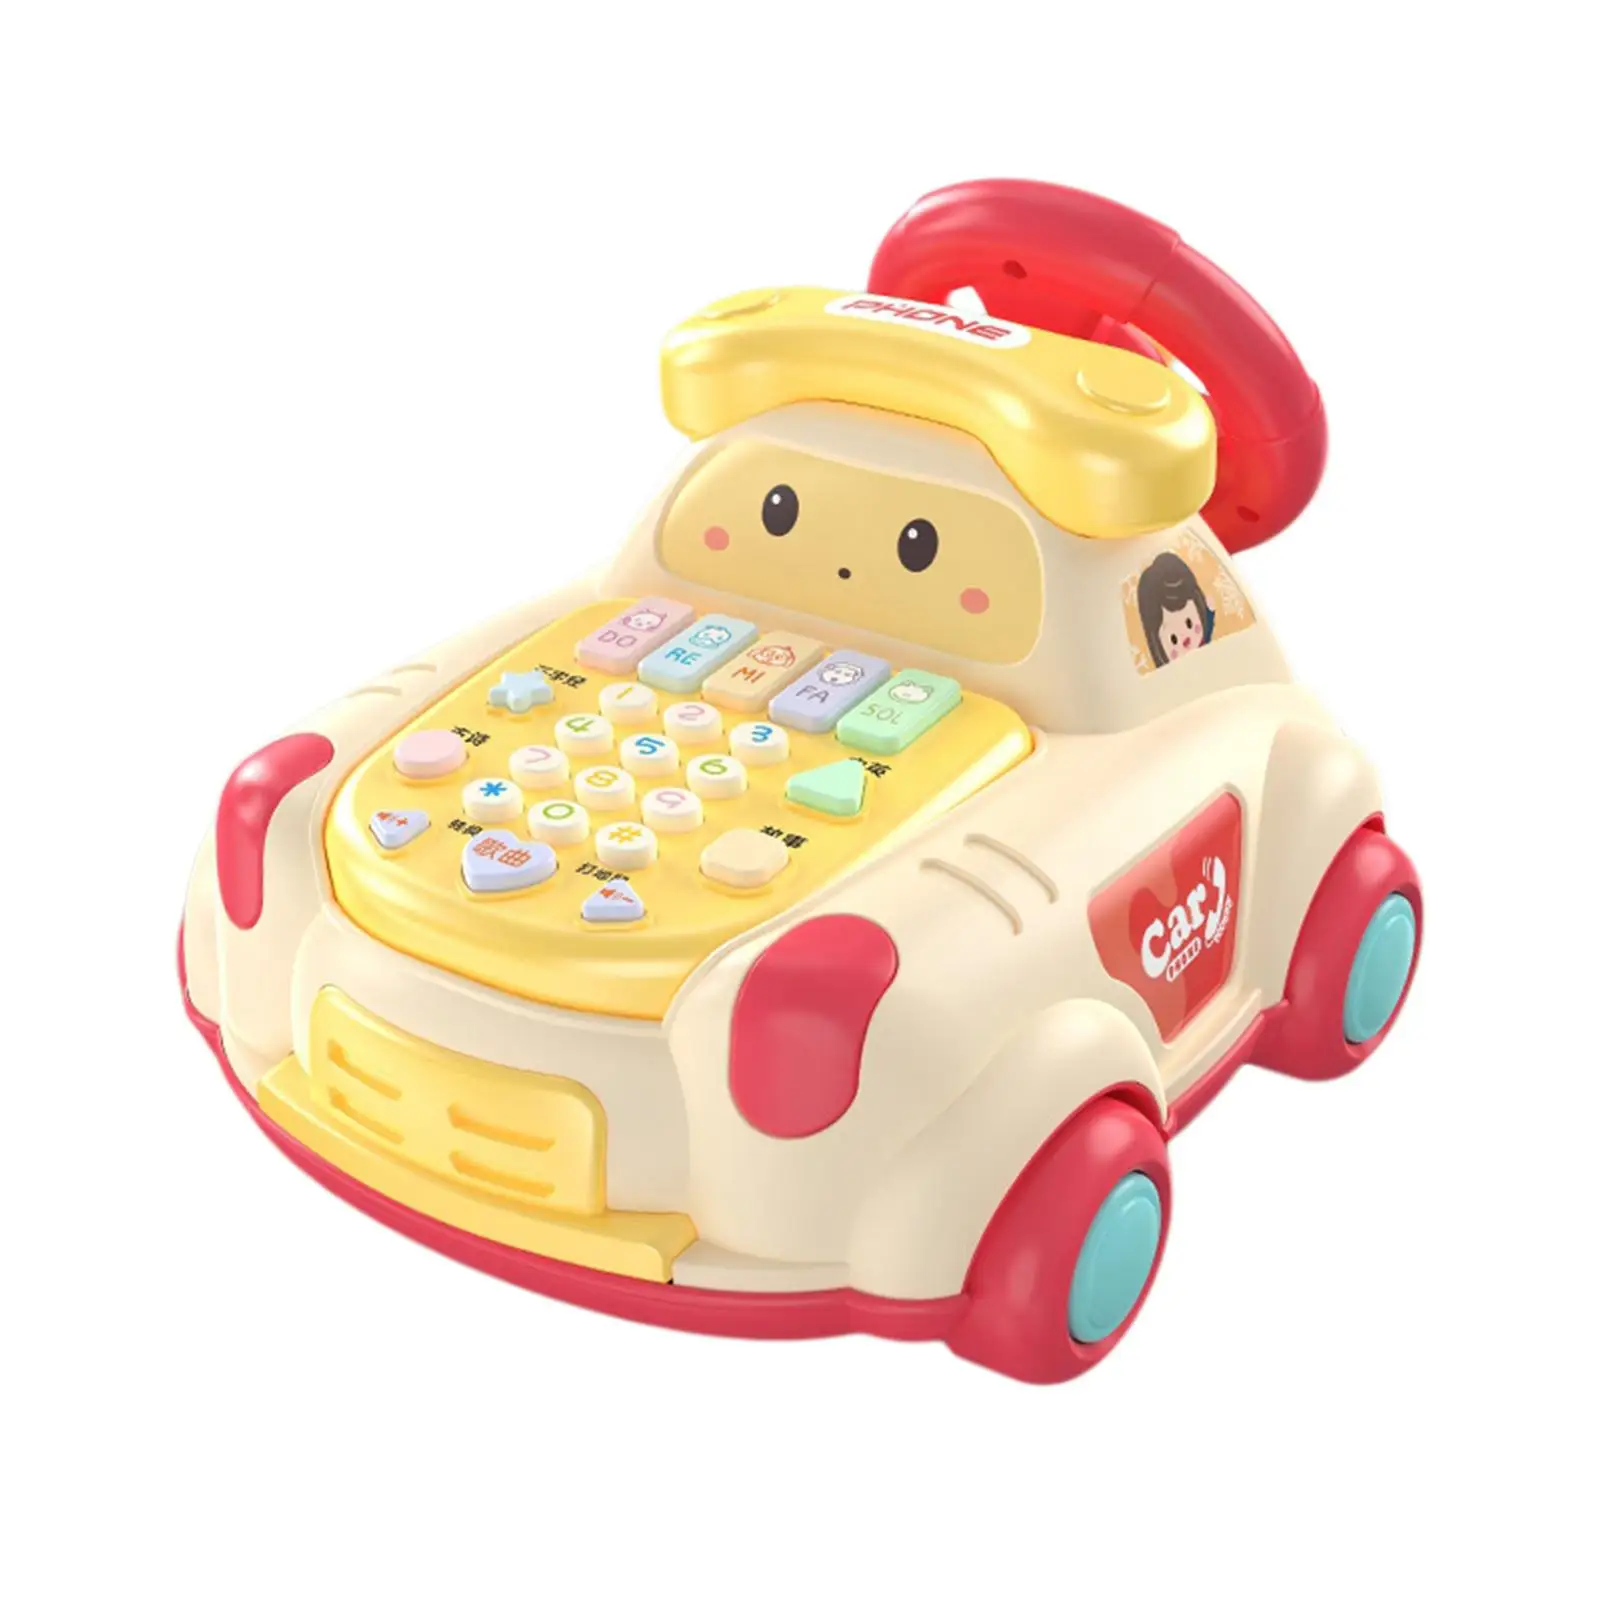 toddlers Steering Wheel car Motor Skills Pretend Play Music Light Phone Toy for Game Interaction Development Activity